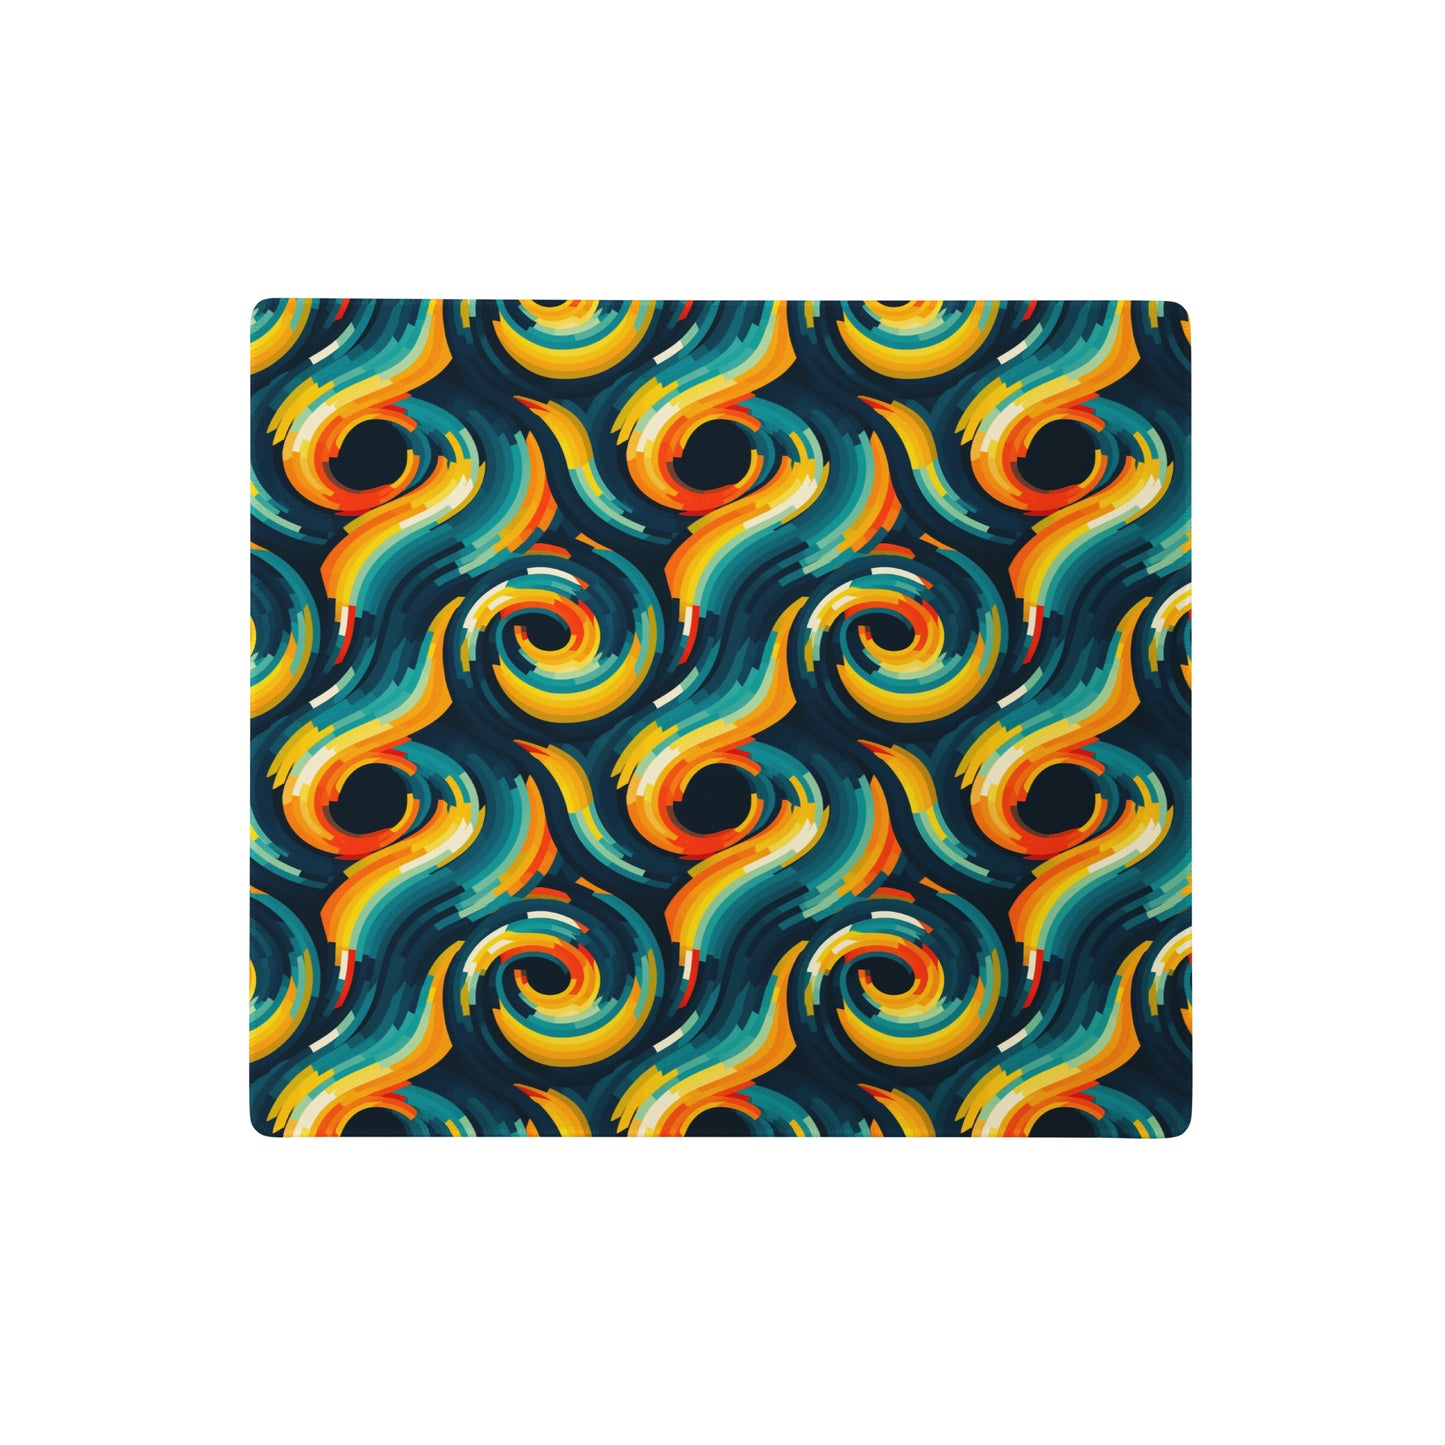  An 18" x 16" desk pad with swirls all over it. Yellow and Blue in color.